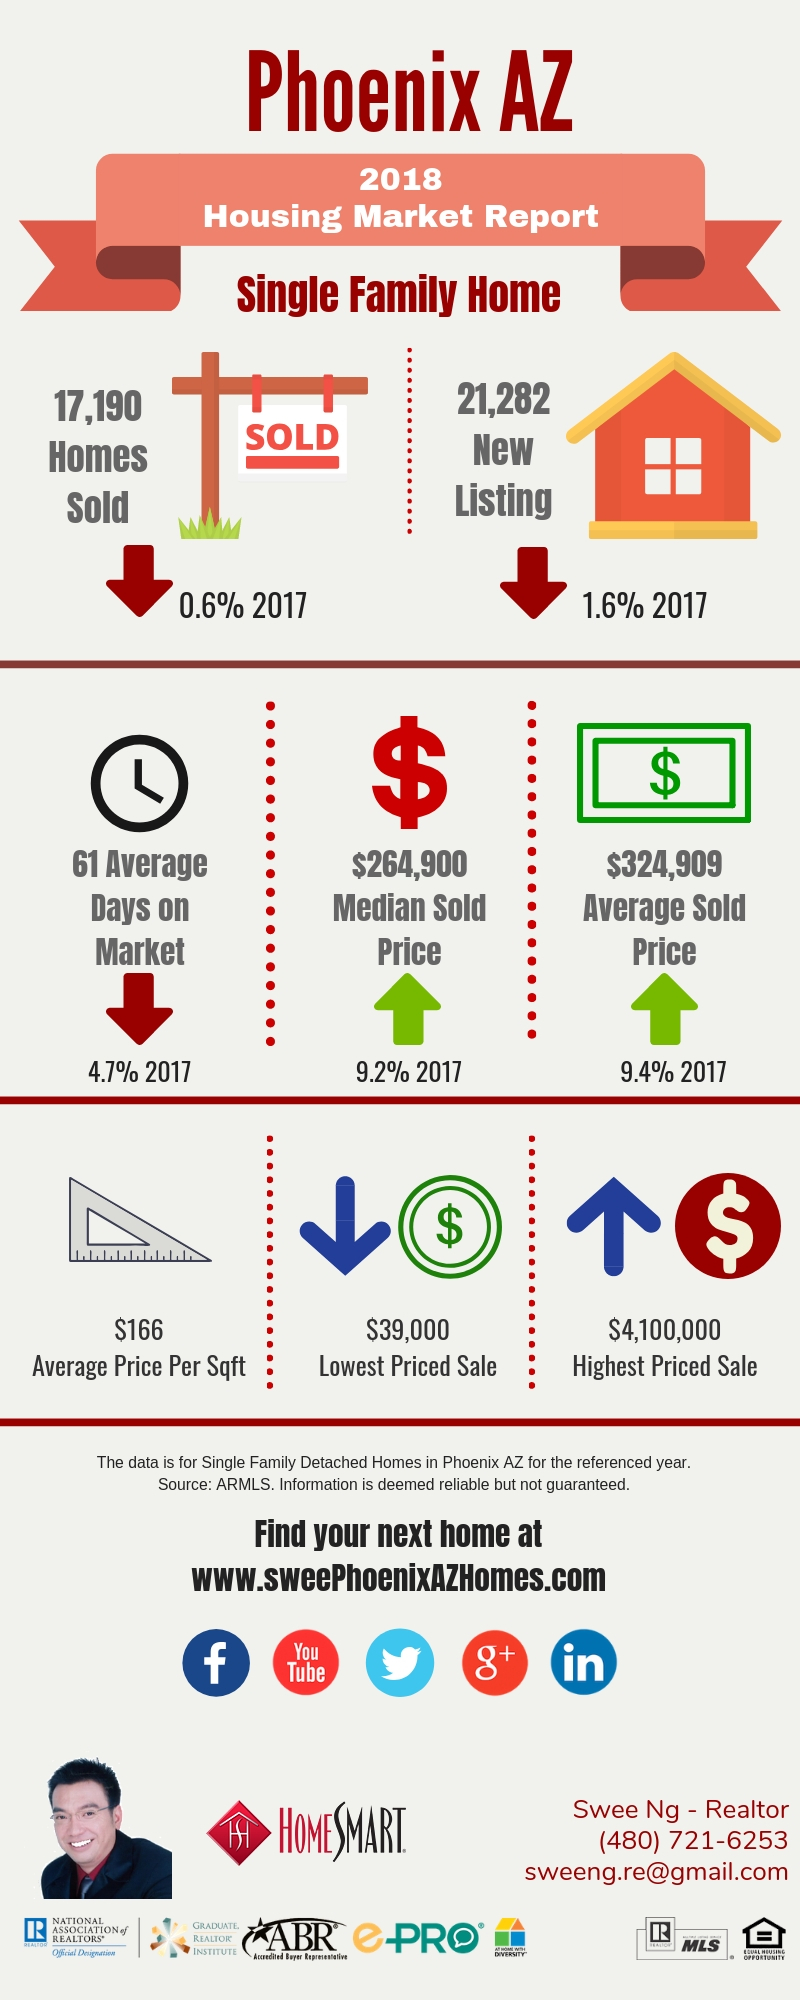 Phoenix AZ Housing Market Trends Report 2018 by Swee Ng